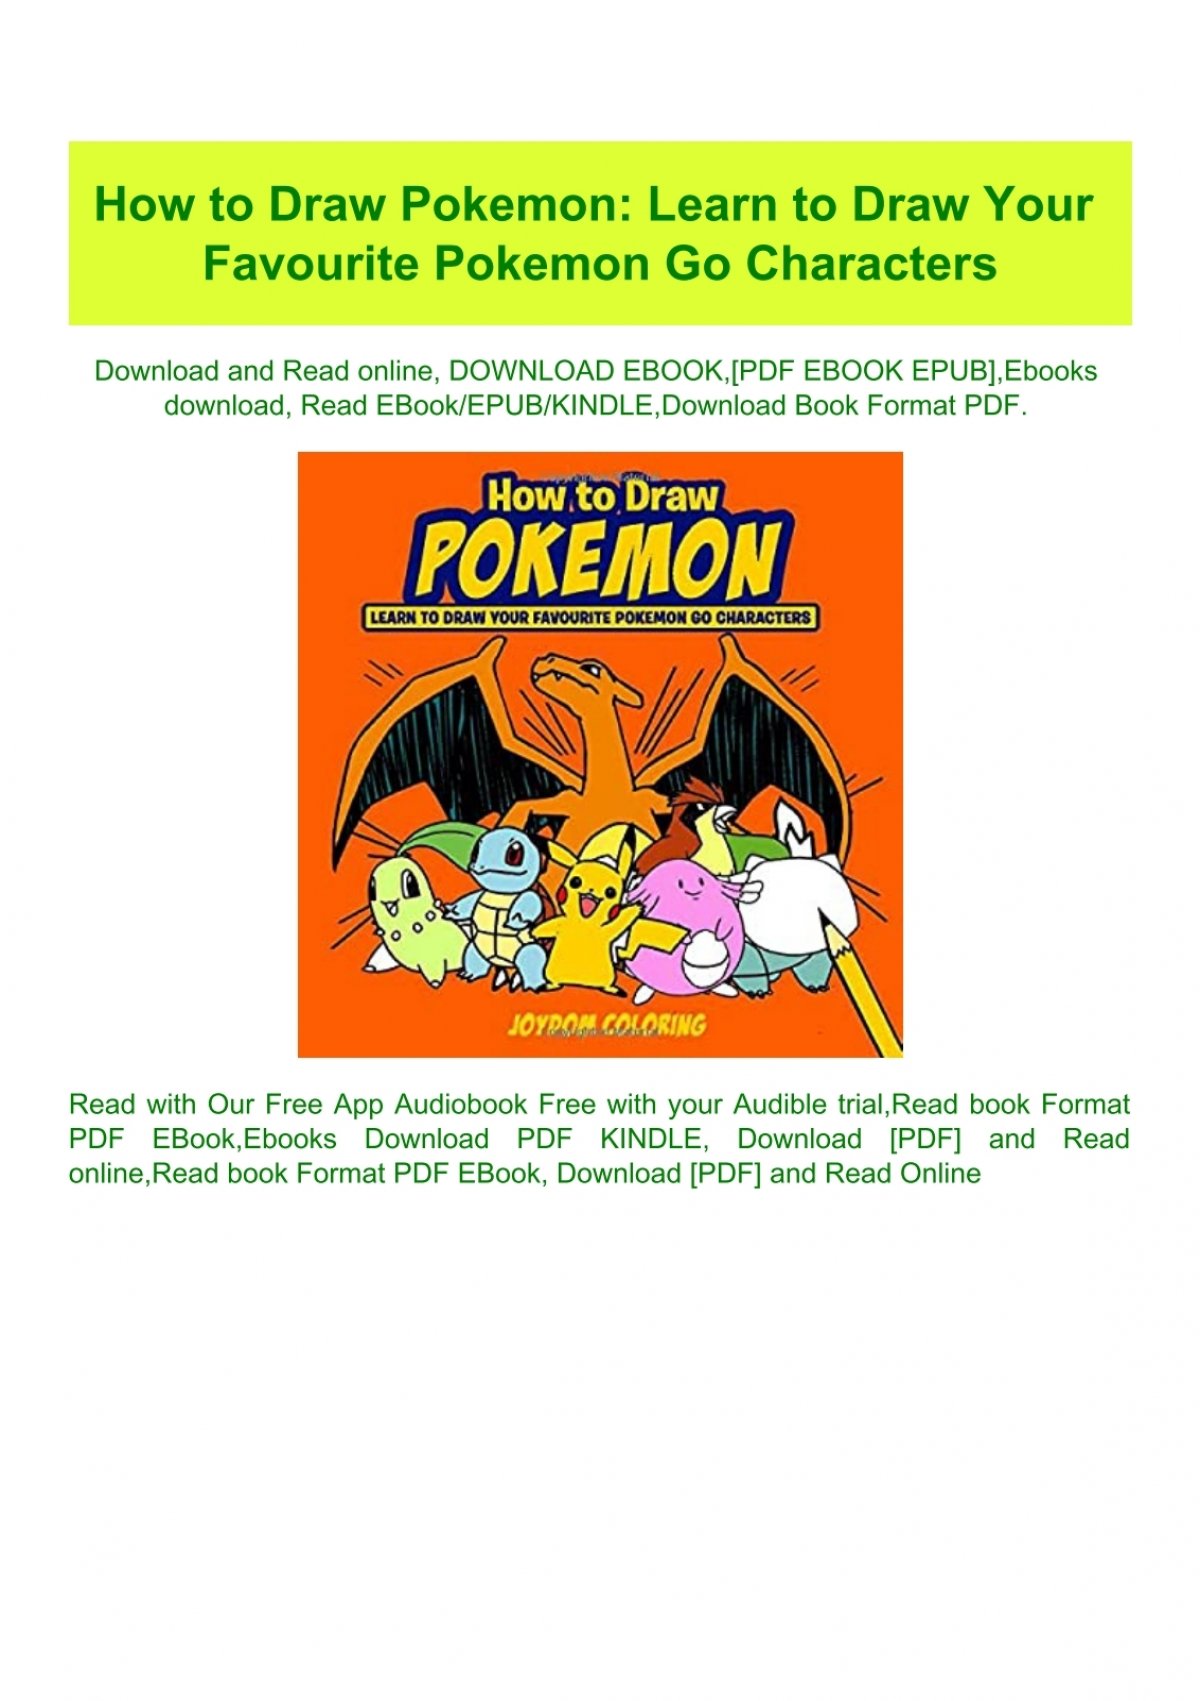 Pdf How To Draw Pokemon Learn To Draw Your Favourite Pokemon Go Characters Online Book - download pdf ebook free roblox character